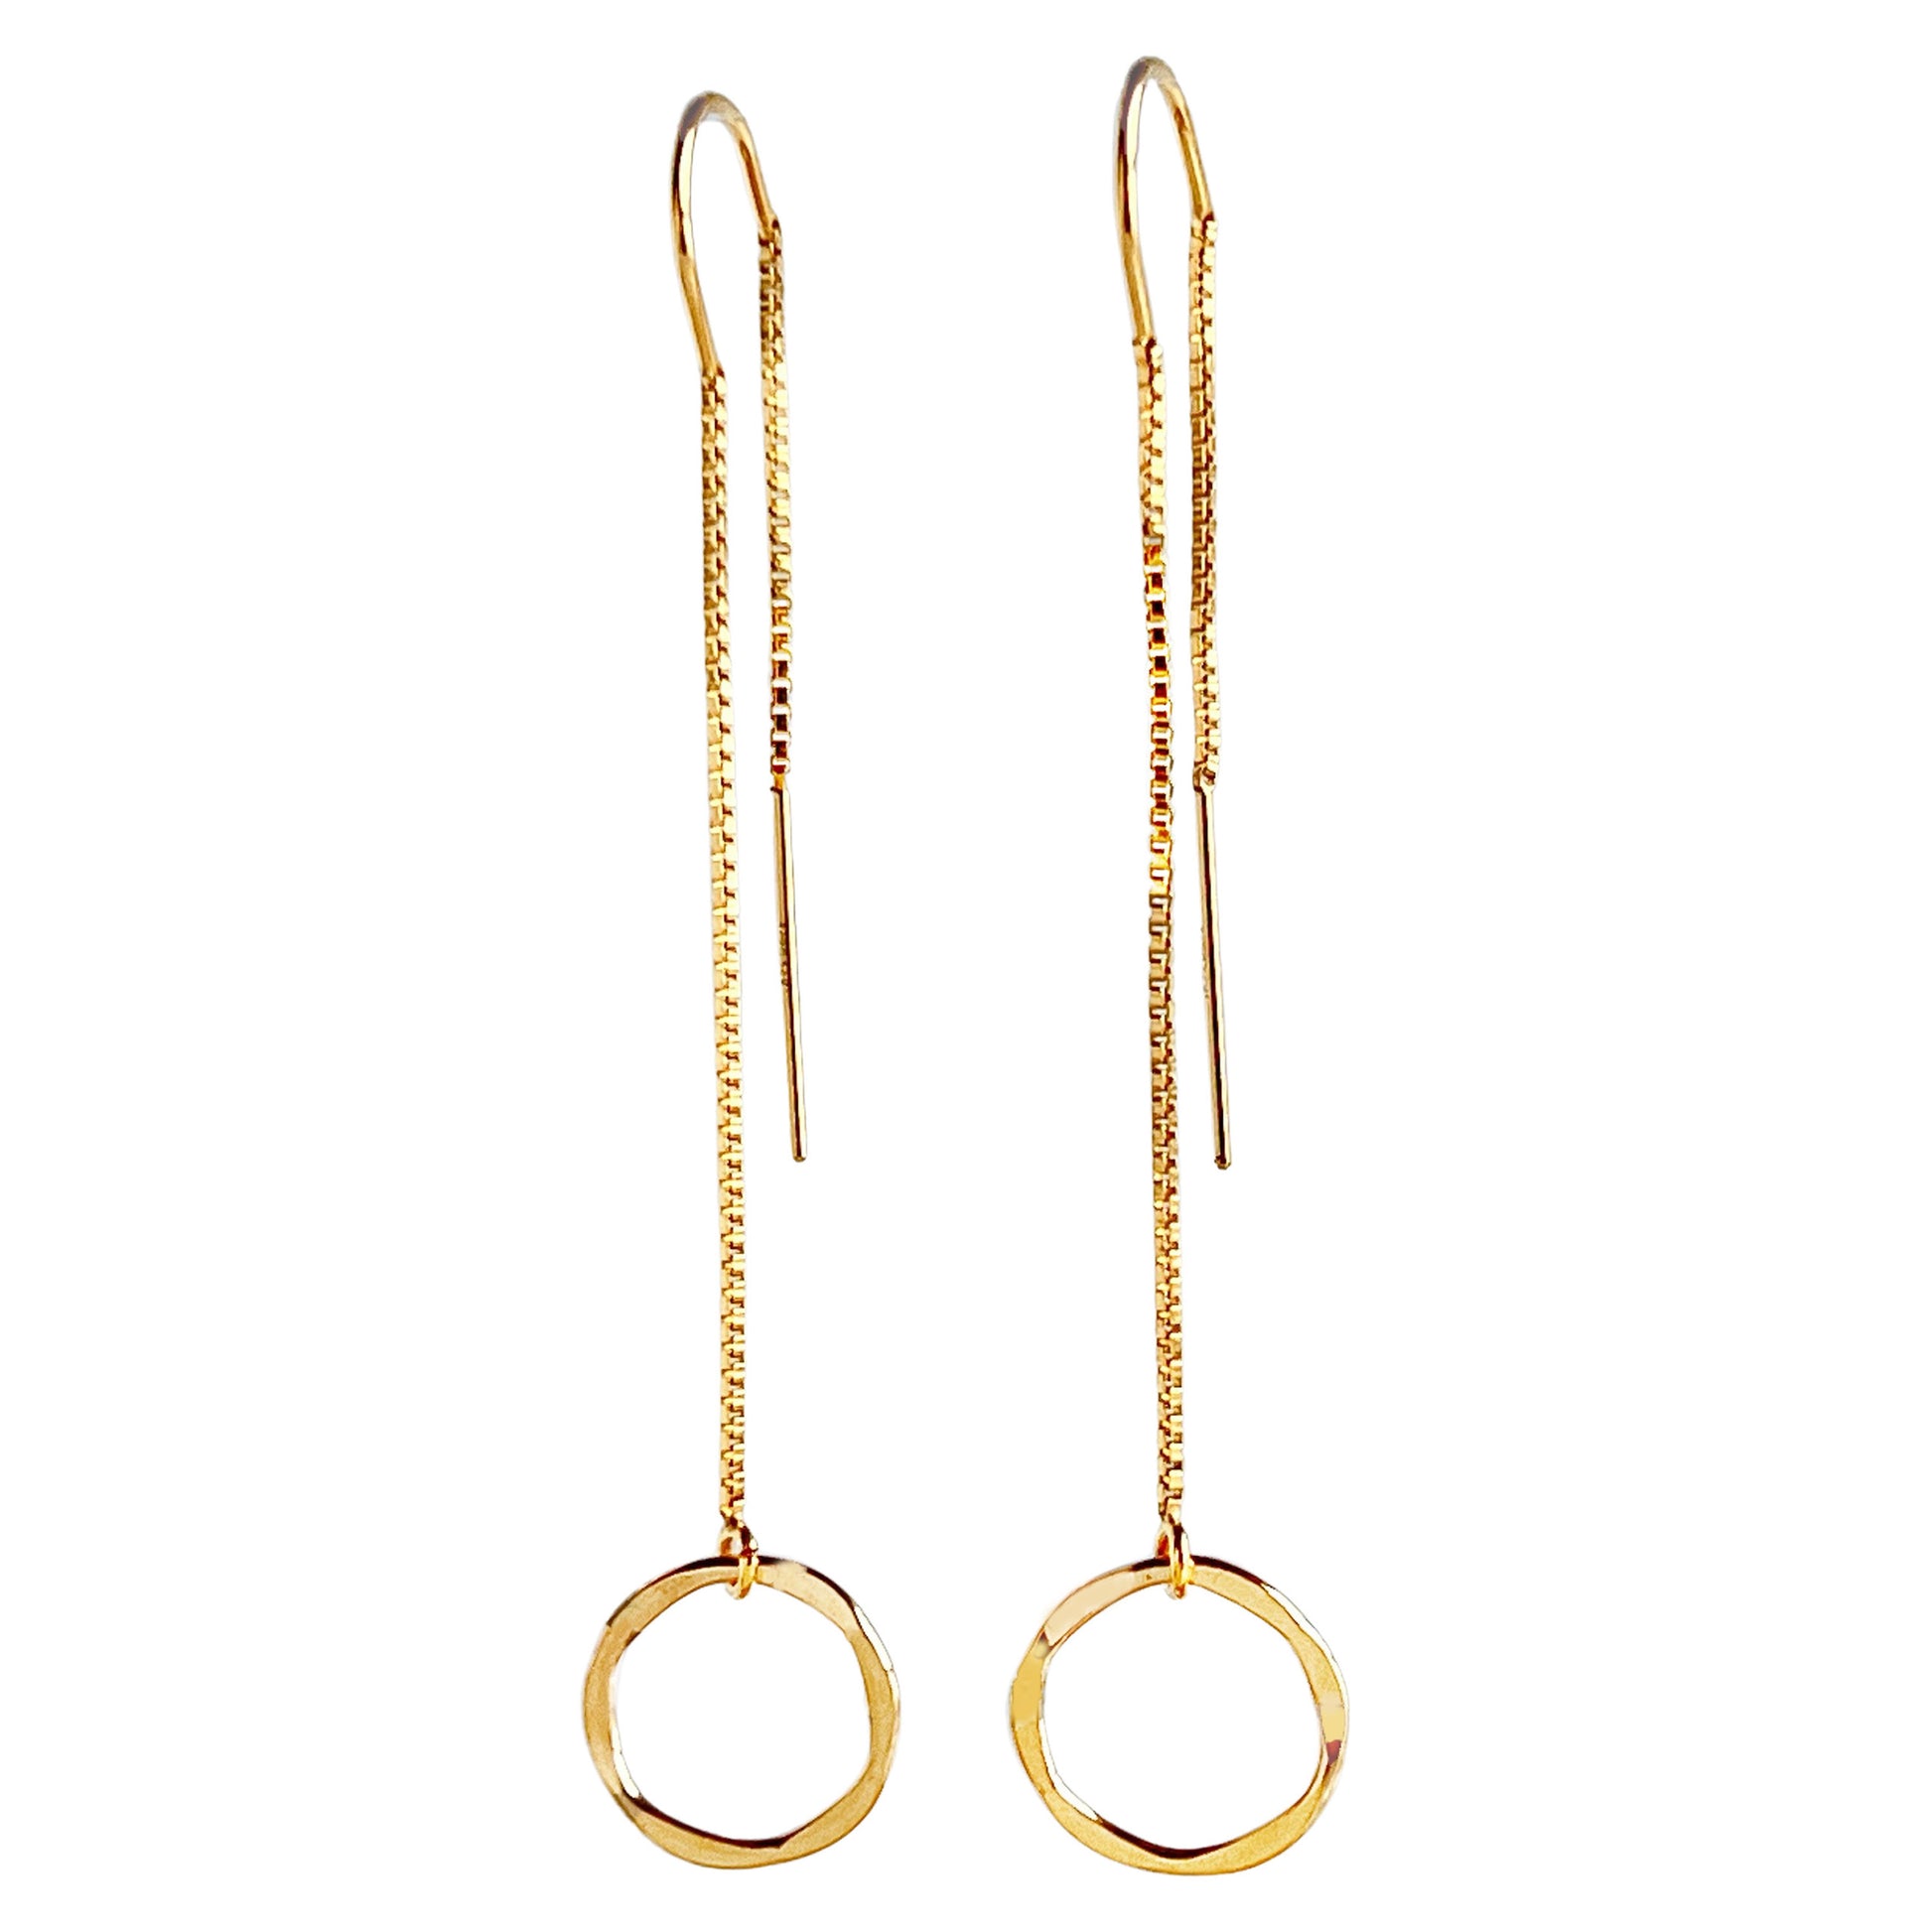 14k gold filled long dangle threader earrings with small (10mm) gold hammered ring in front.  Length is 2 inches in the front and 1.5 inches in the back